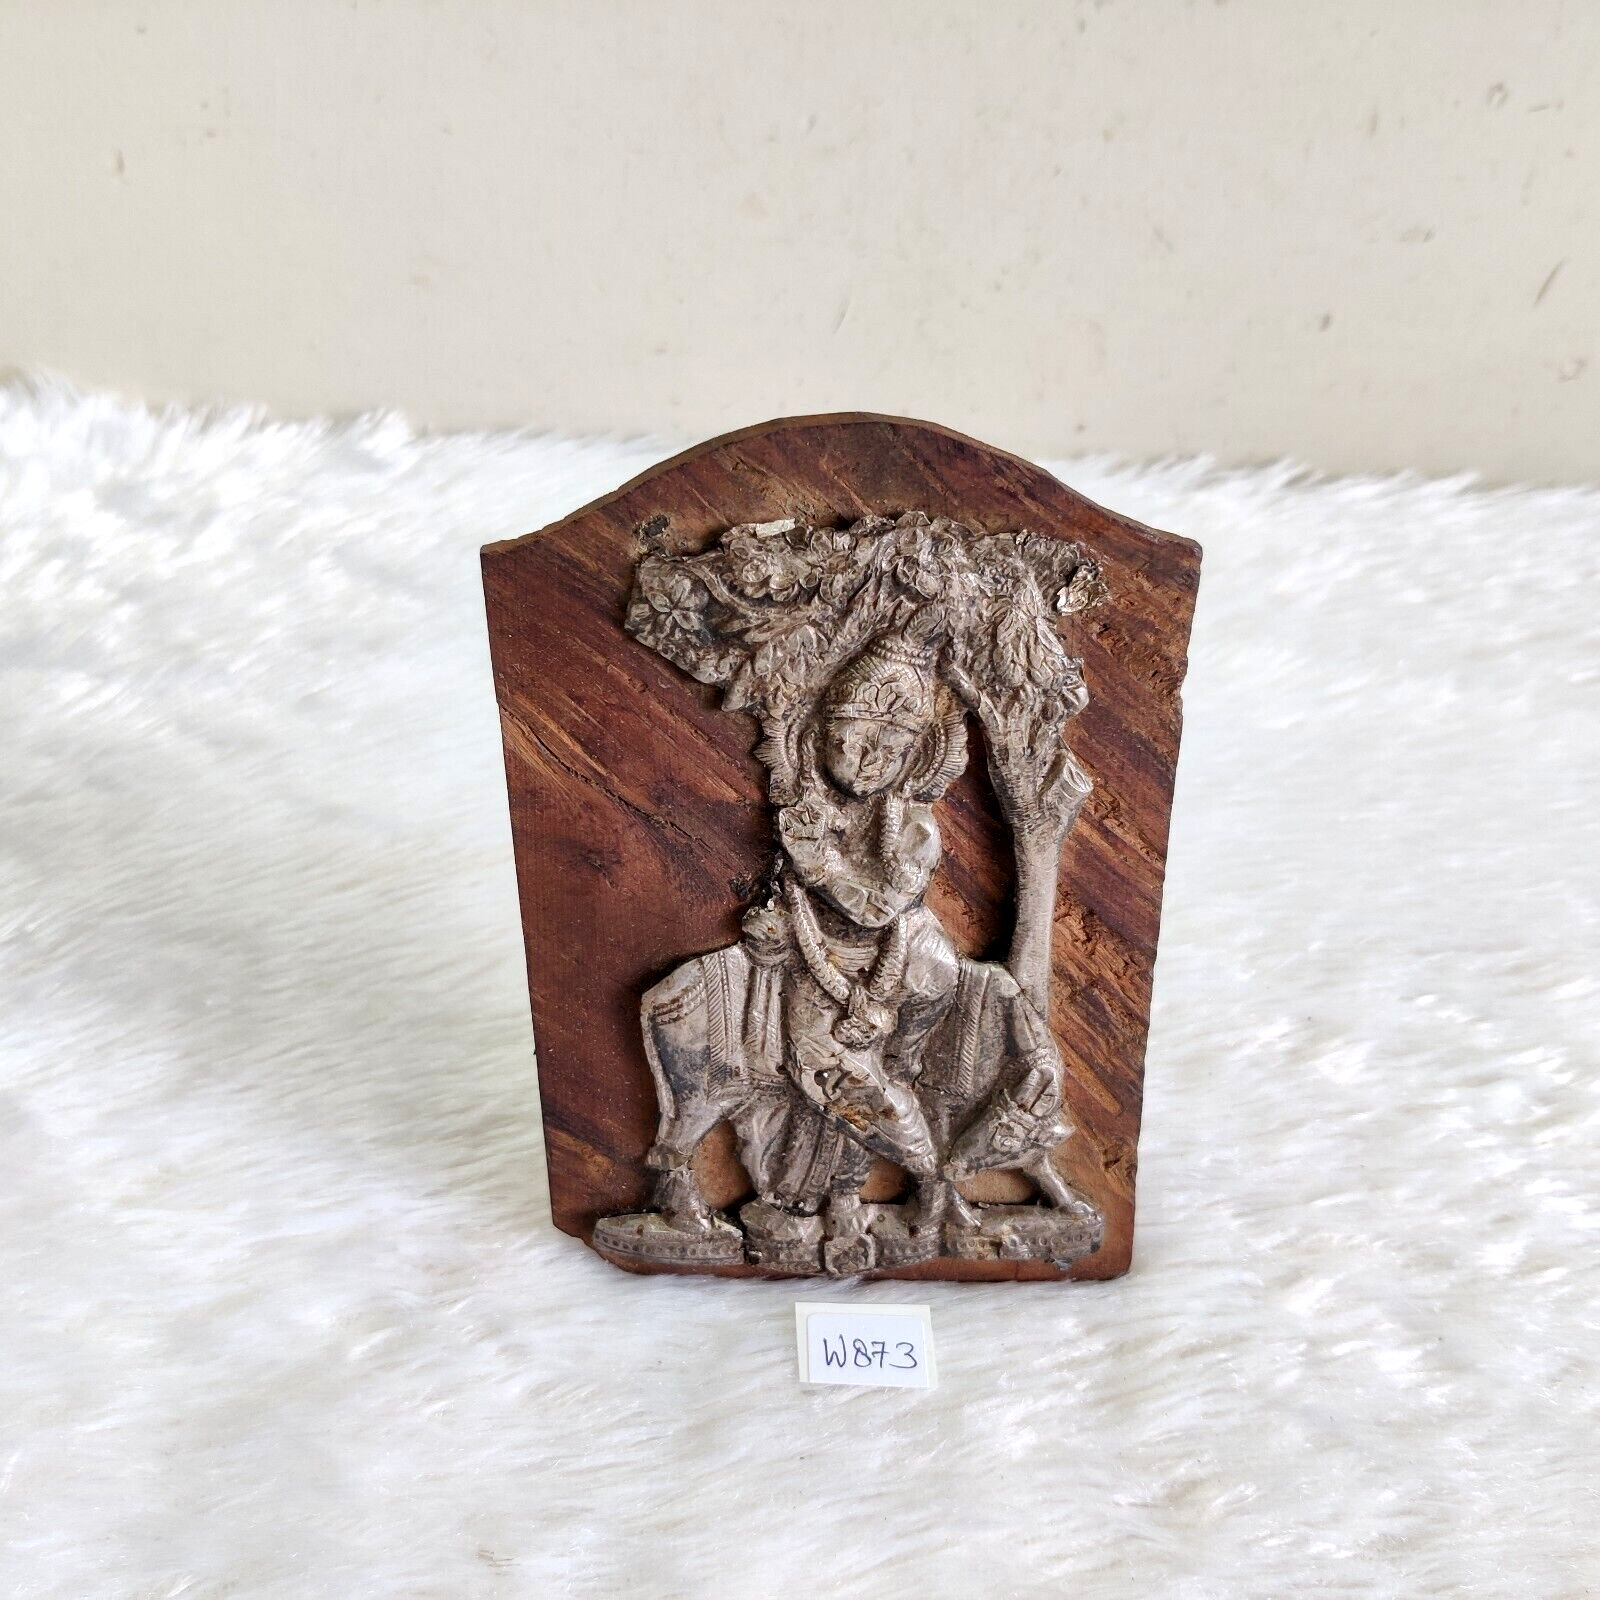 Vintage Handcrafted Lord Krishna Silver Art Statue Figurine Rosewood Frame W873